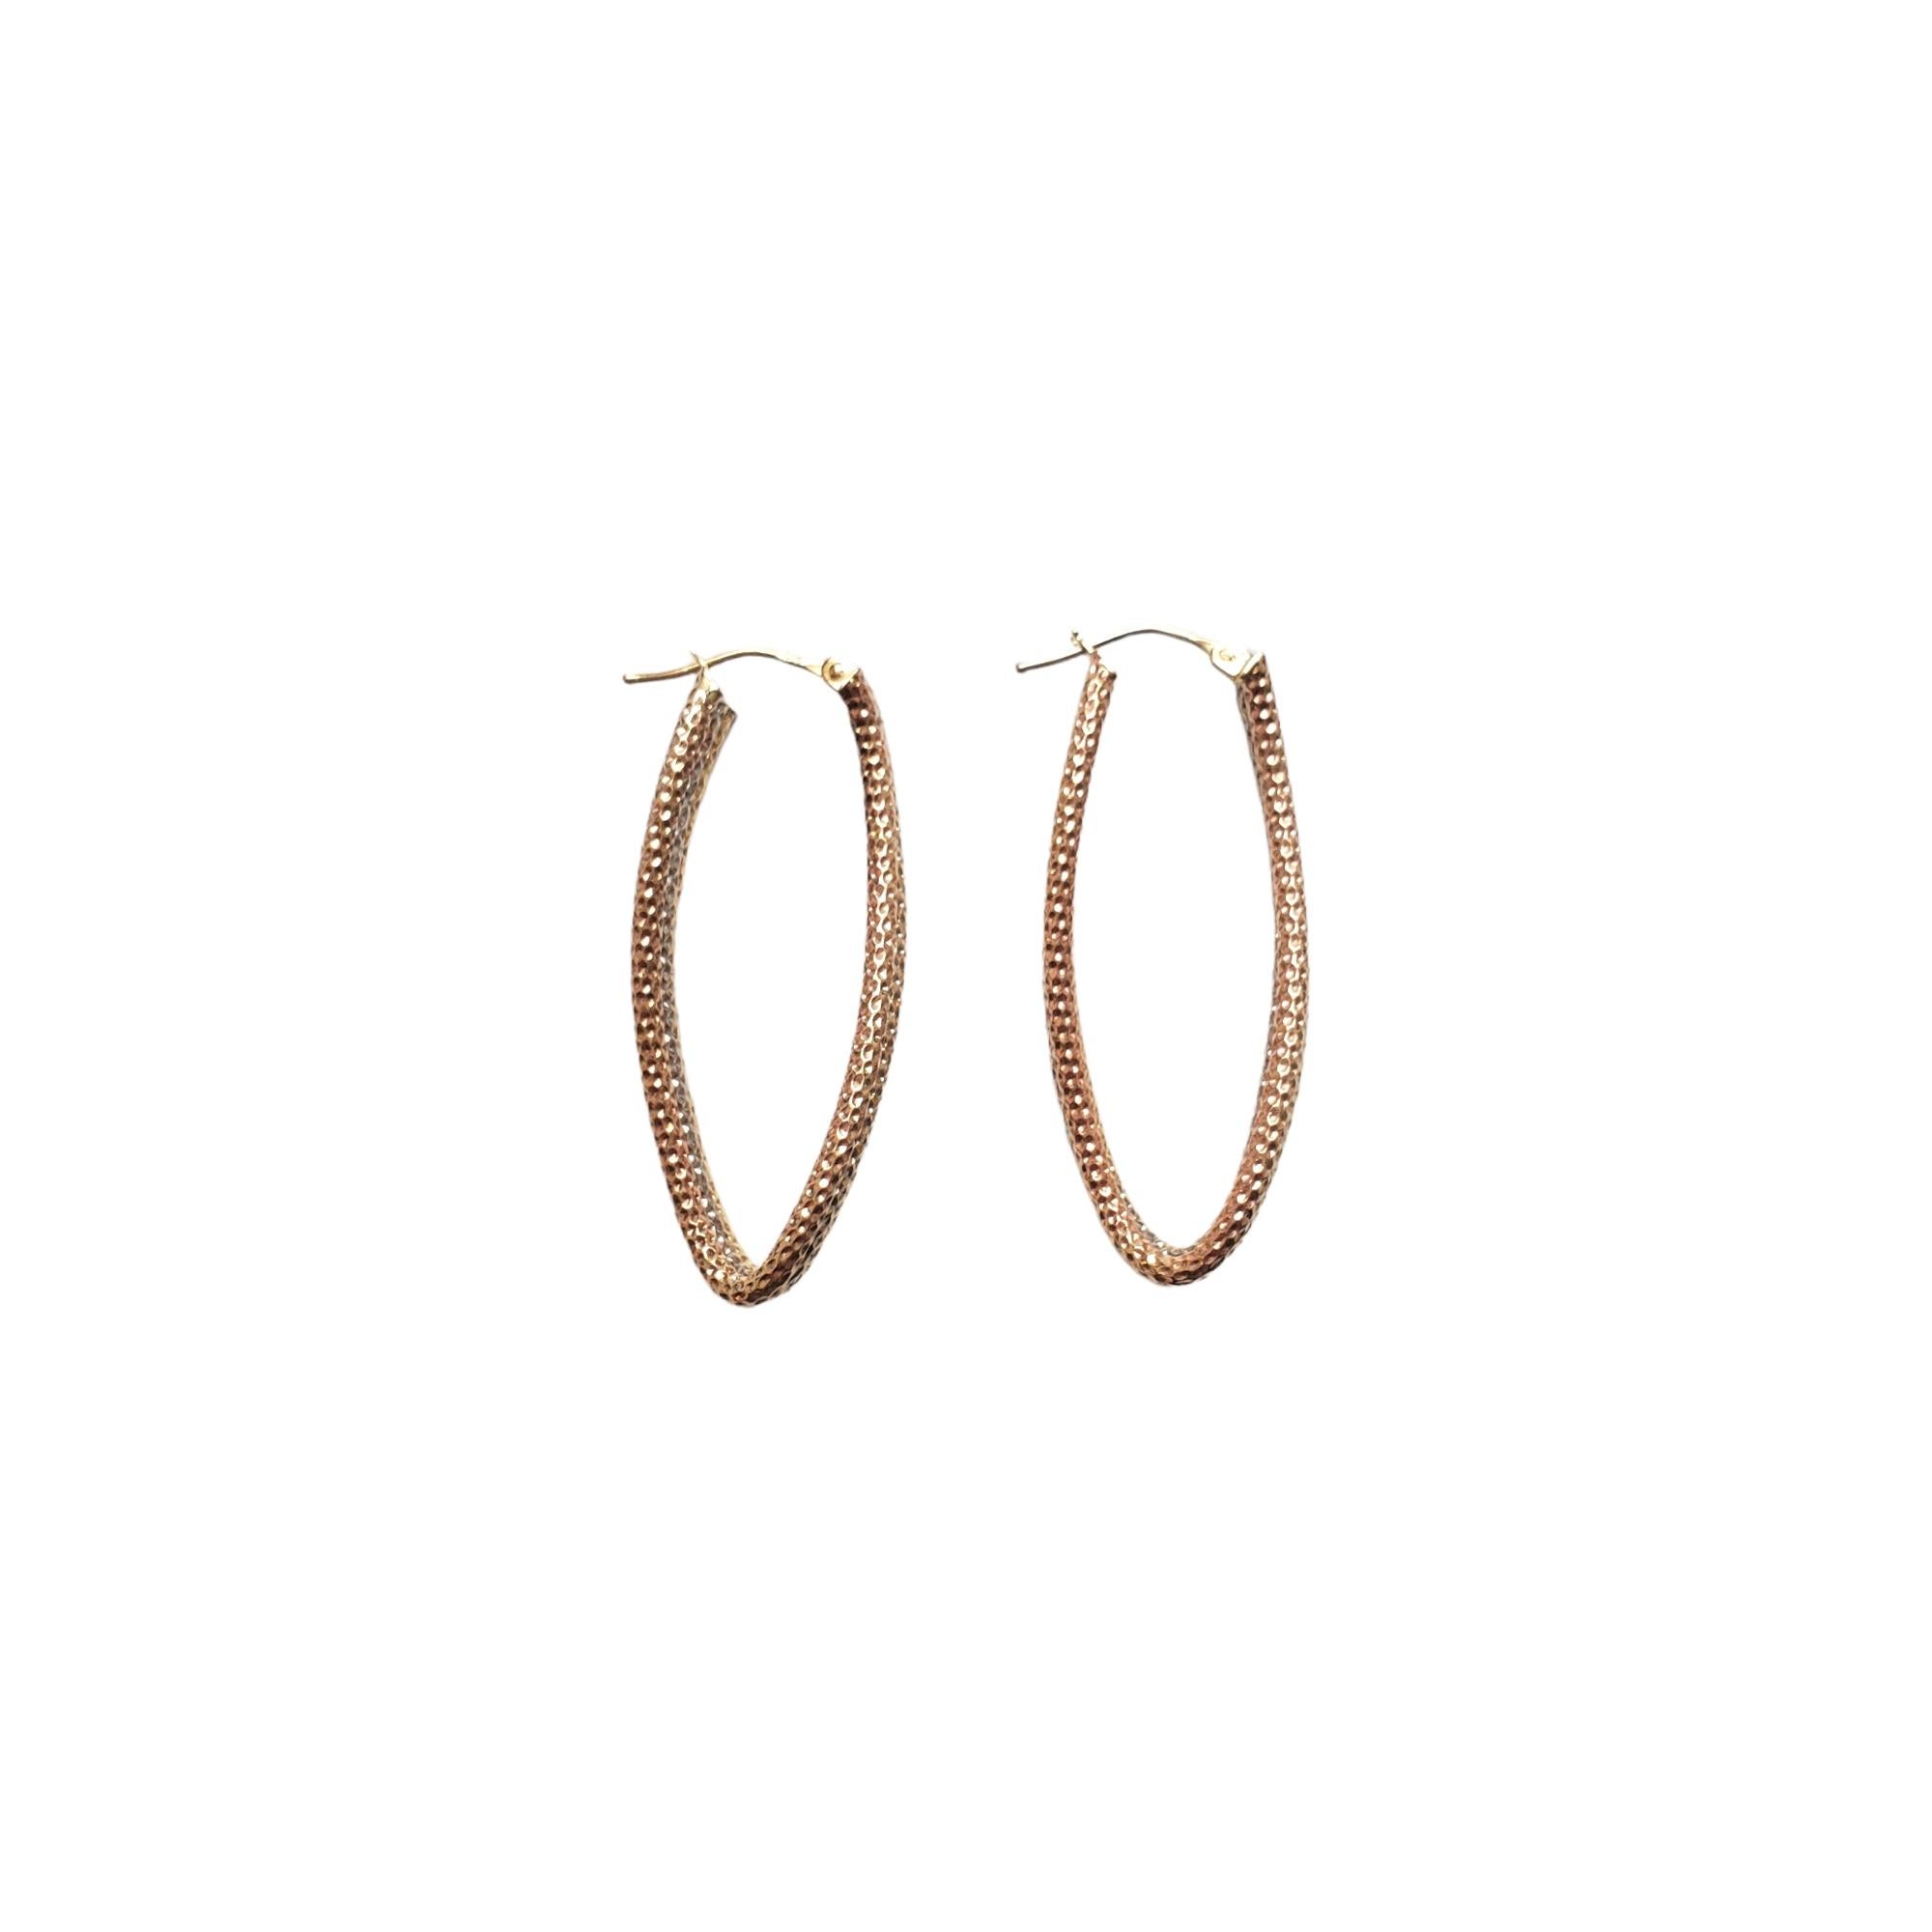 14K Rose Gold, Yellow Gold, and White Gold 3 Tone Twist Earrings

These earrings feature a 3 tone twisted rope design with rose gold, yellow gold, and white gold.

42 mm in length and approx. 17mm wide

Hallmark: 585

Weight: 5.0 gr/ 3.2 dwt

Very